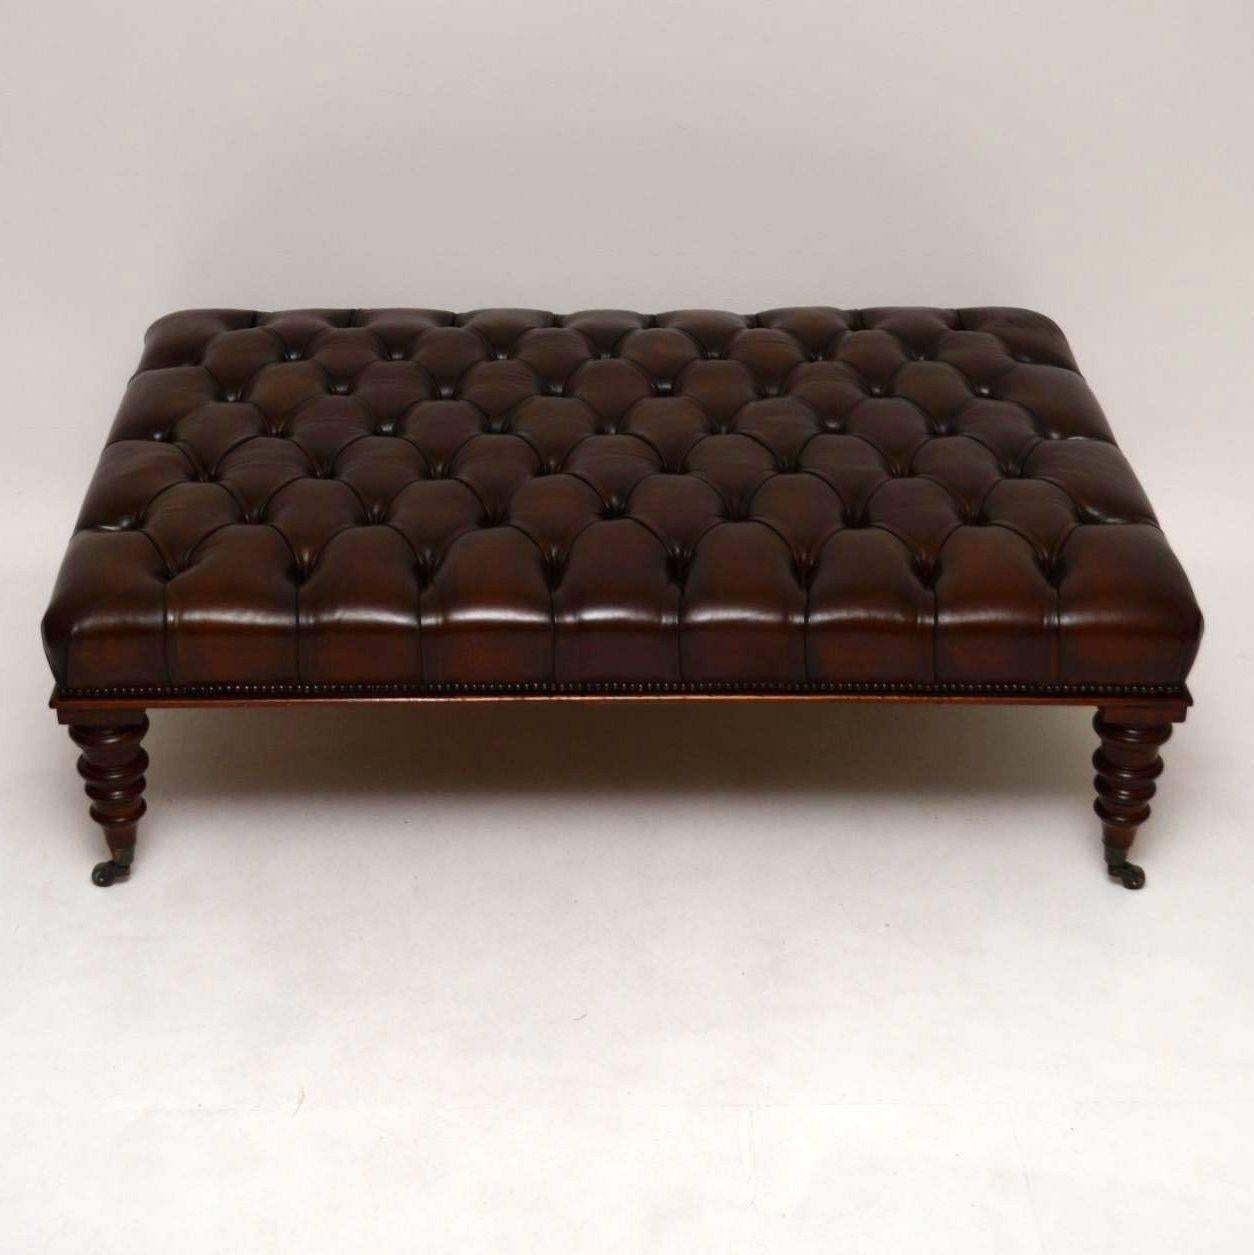 This large antique deep buttoned leather and mahogany coffee table stool is in stock right now. I have just had two more made, because they seem to be very popular. As usual, we can have them made to order any size or color. They are very high